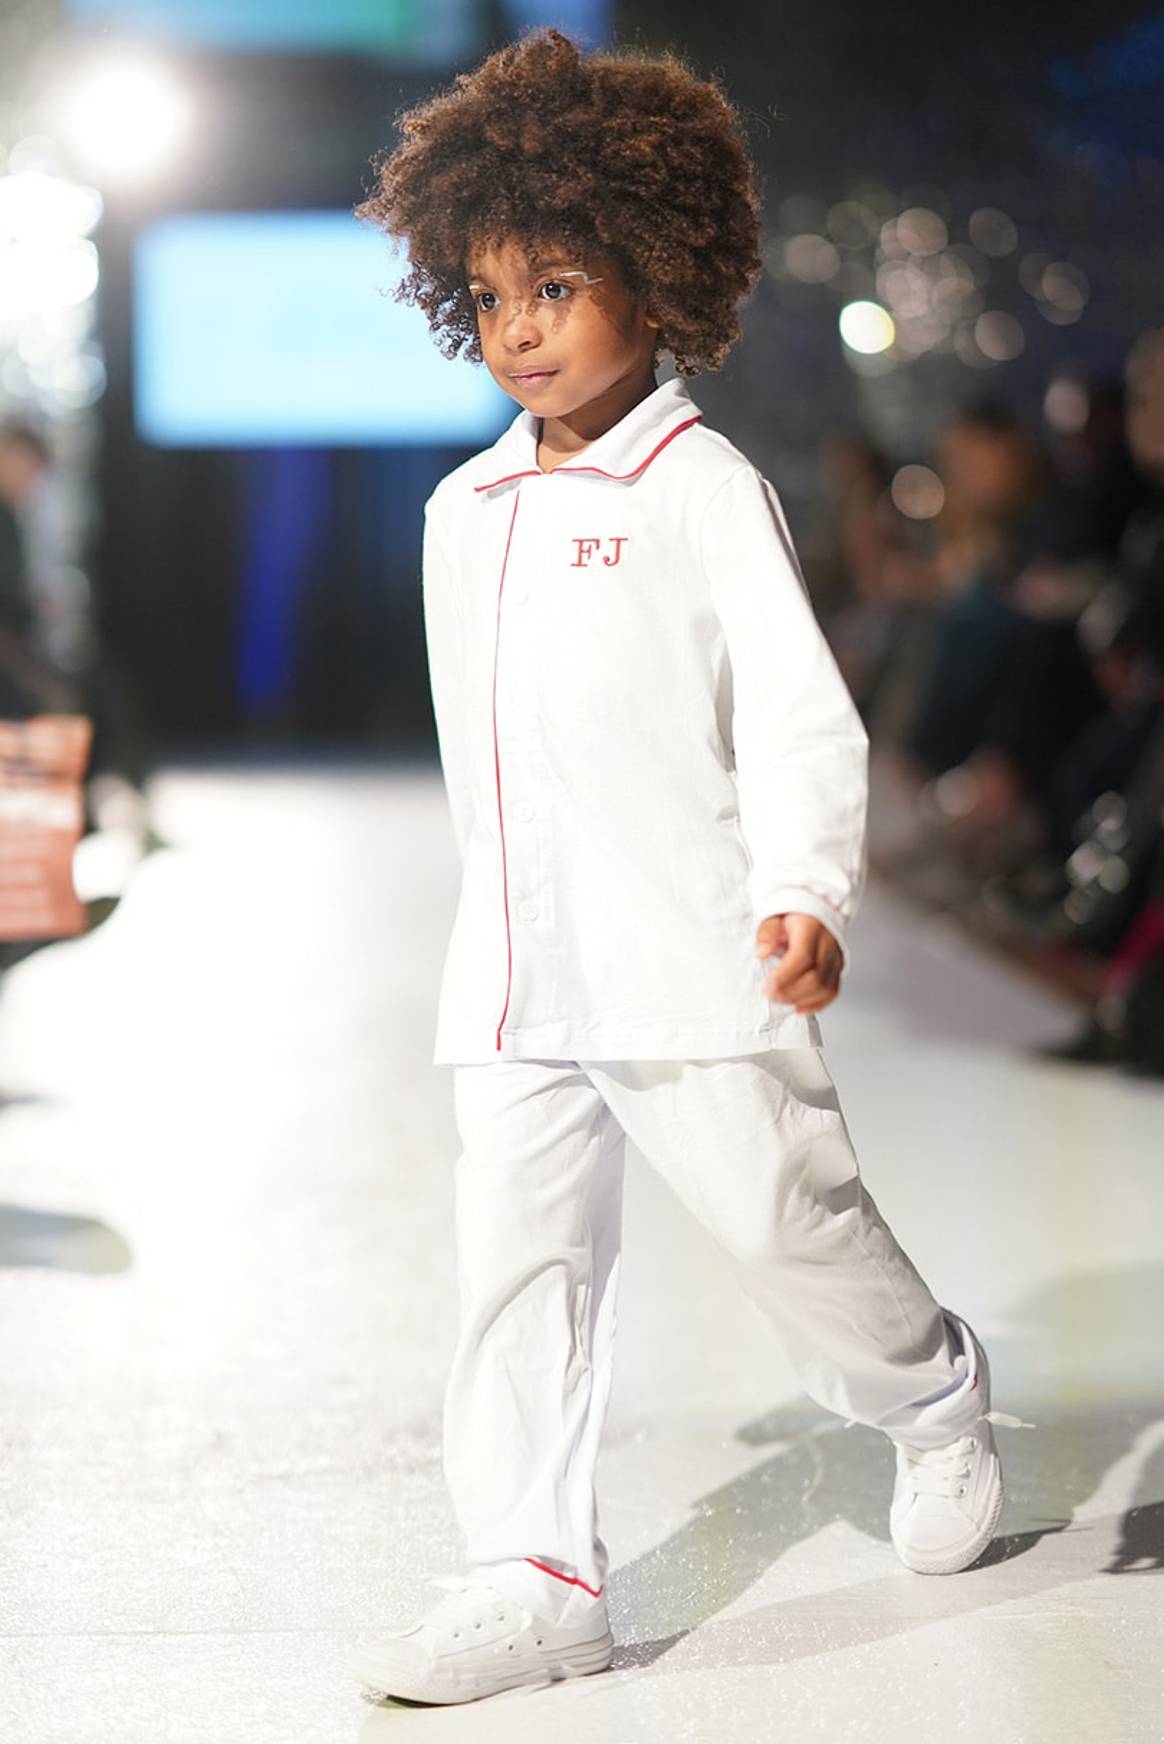 In pictures: Mini Mode - London Kids Fashion Week returns for fifth edition